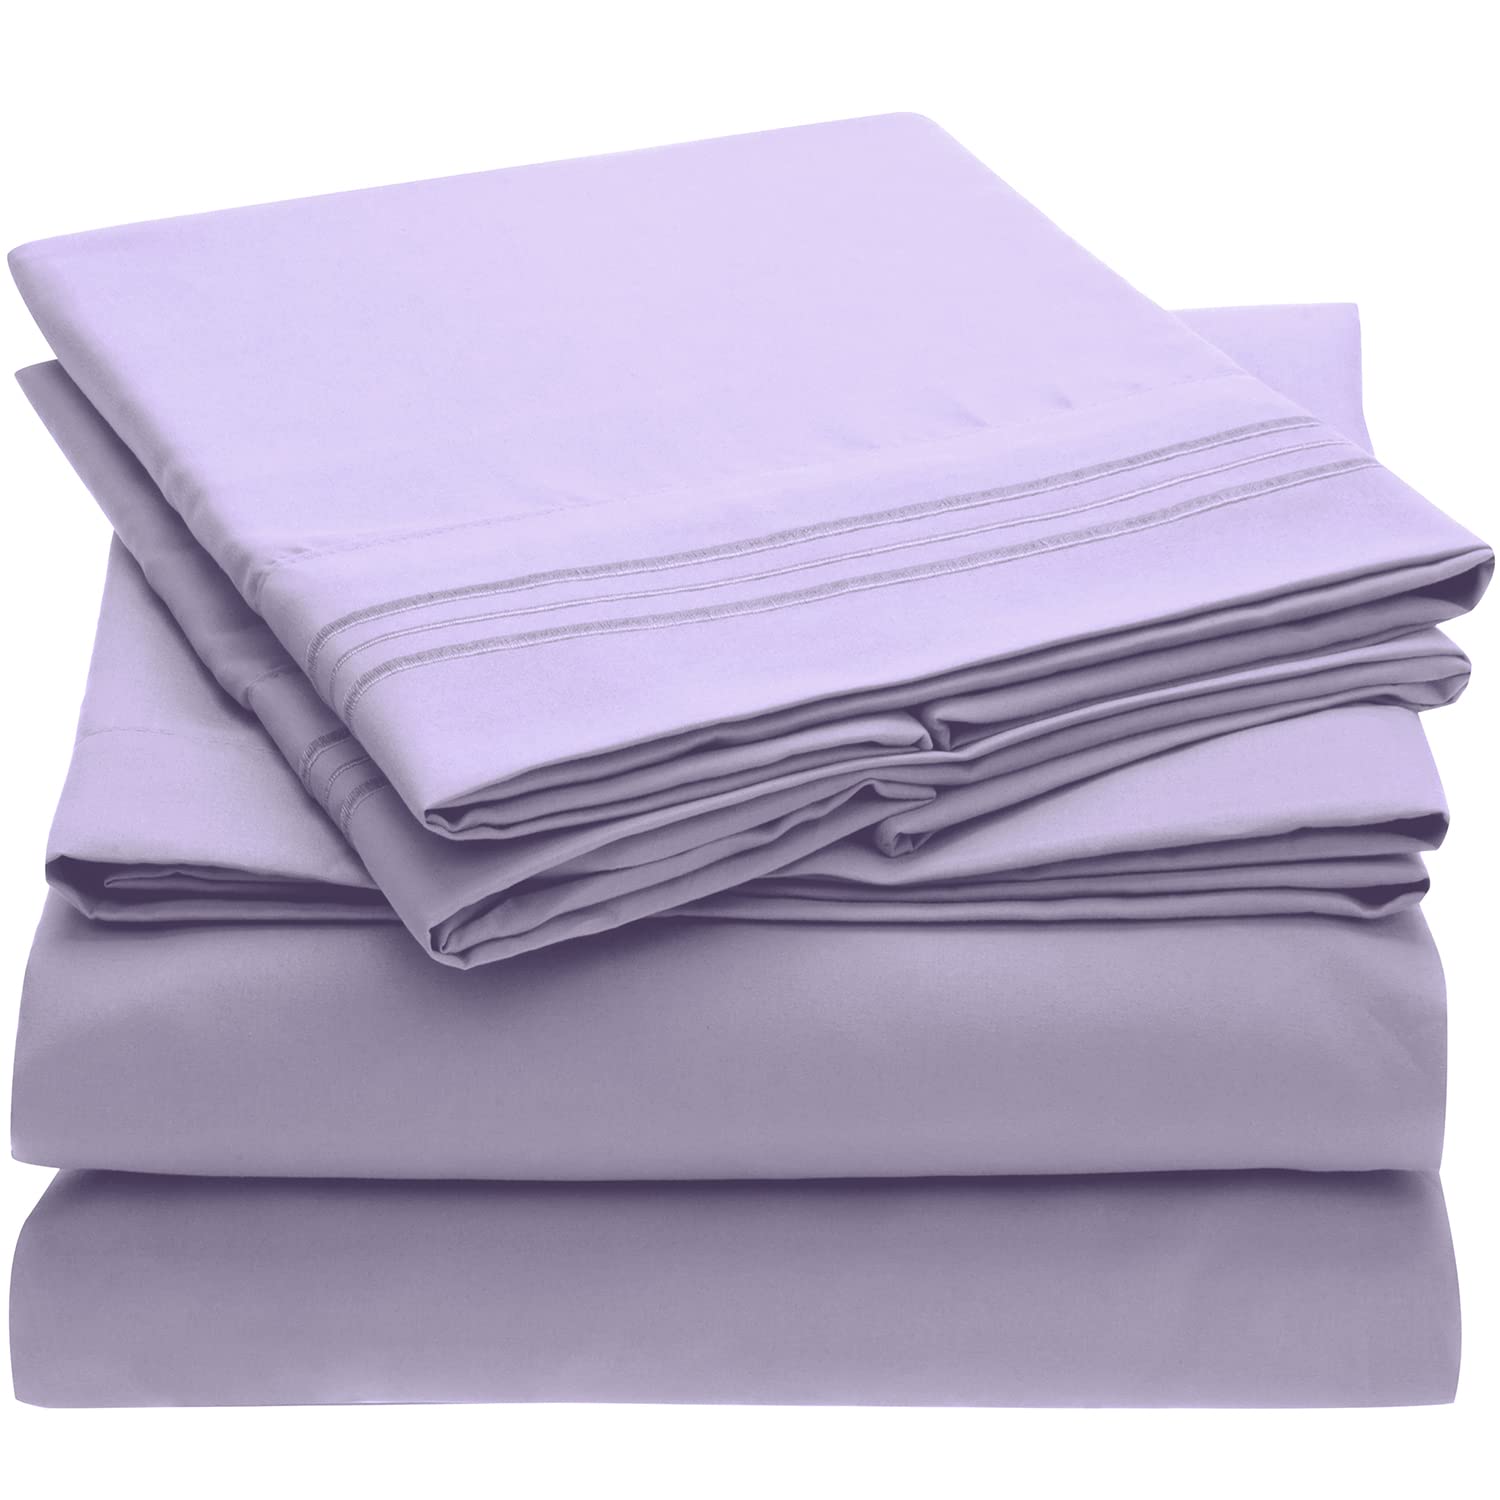 Book Cover Mellanni Full Size Sheet Set - Hotel Luxury 1800 Bedding Sheets & Pillowcases - Extra Soft Cooling Bed Sheets - Deep Pocket up to 16 inch - Wrinkle, Fade, Stain Resistant - 4 Piece (Full, Violet)